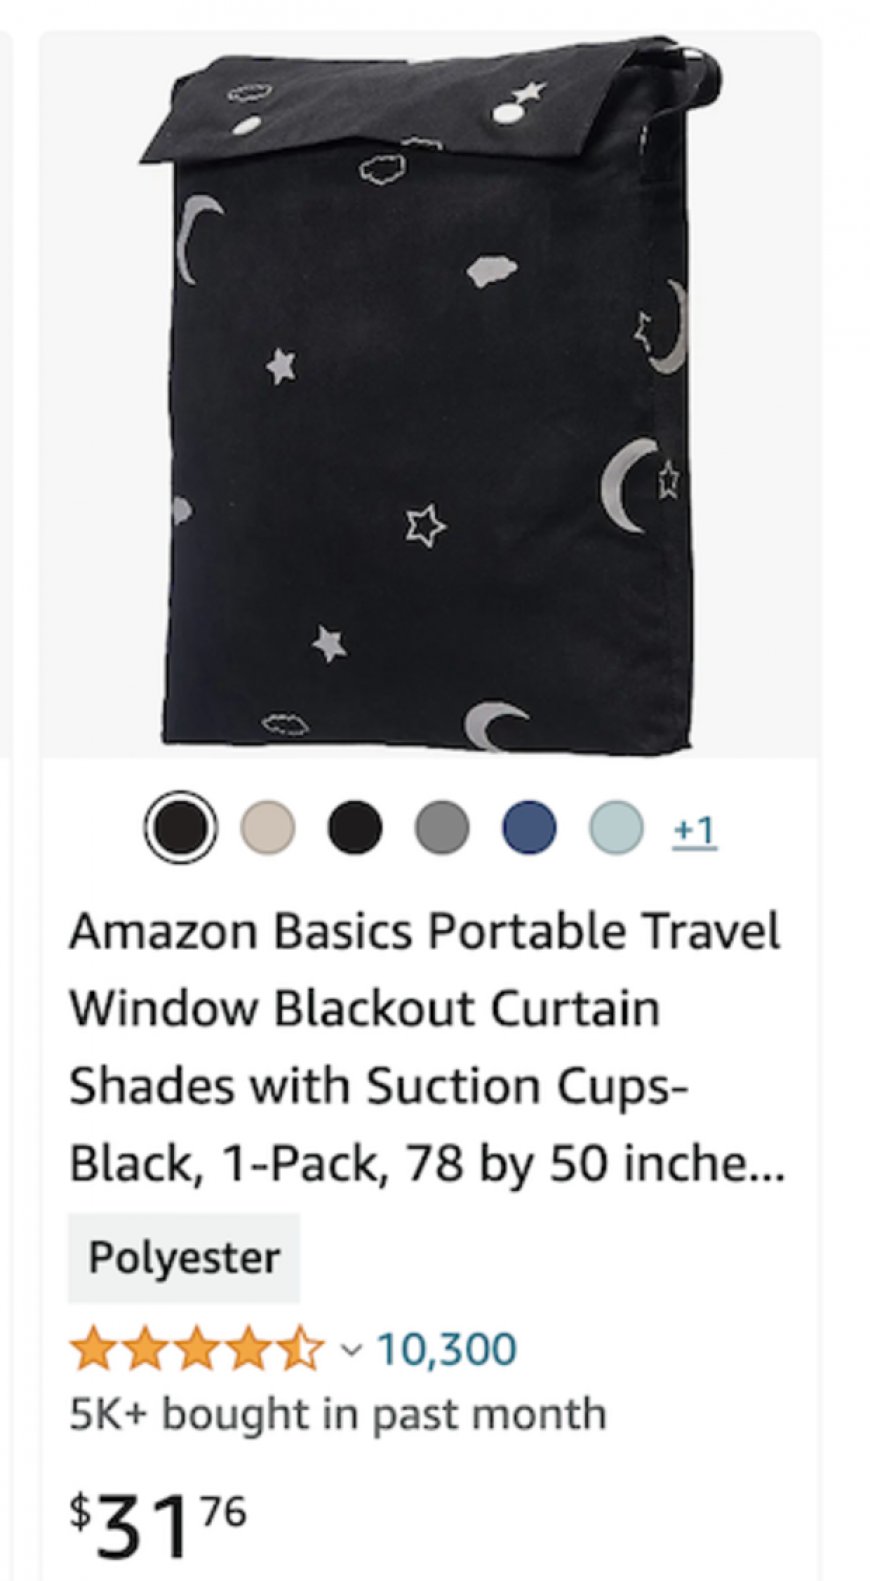 These $32 'tremendously' helpful portable blackout curtains have sold thousands of times over the last month